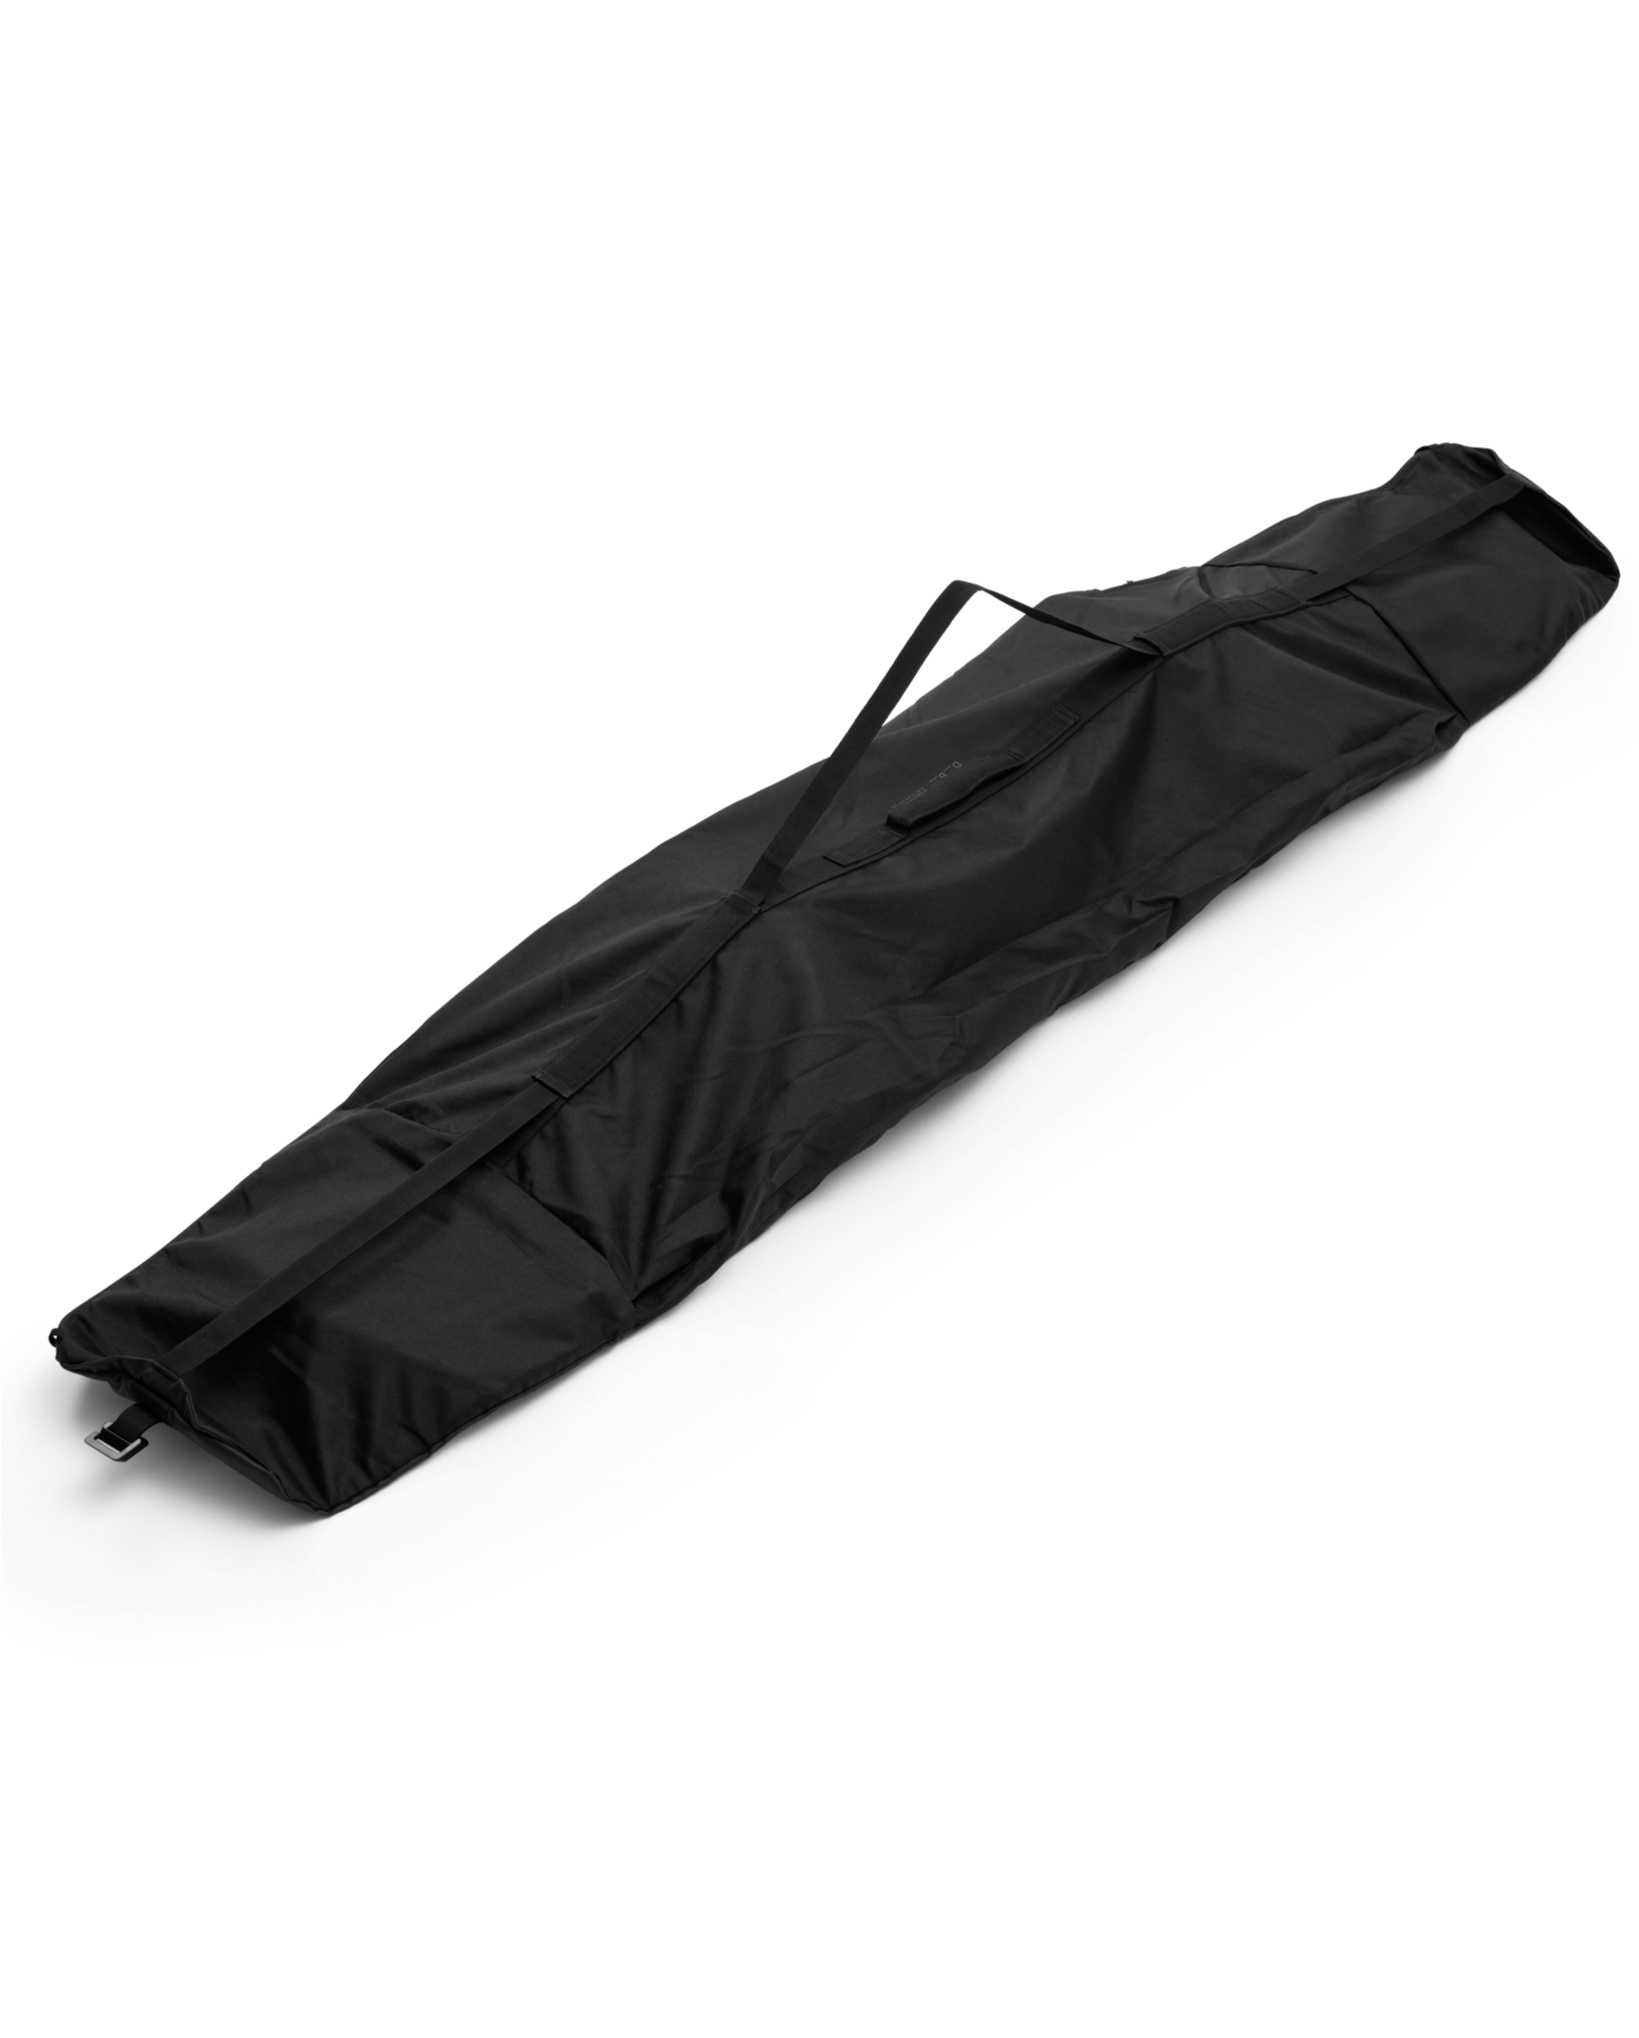 Snow Essential Snowboard Bag Black Out - Black Out